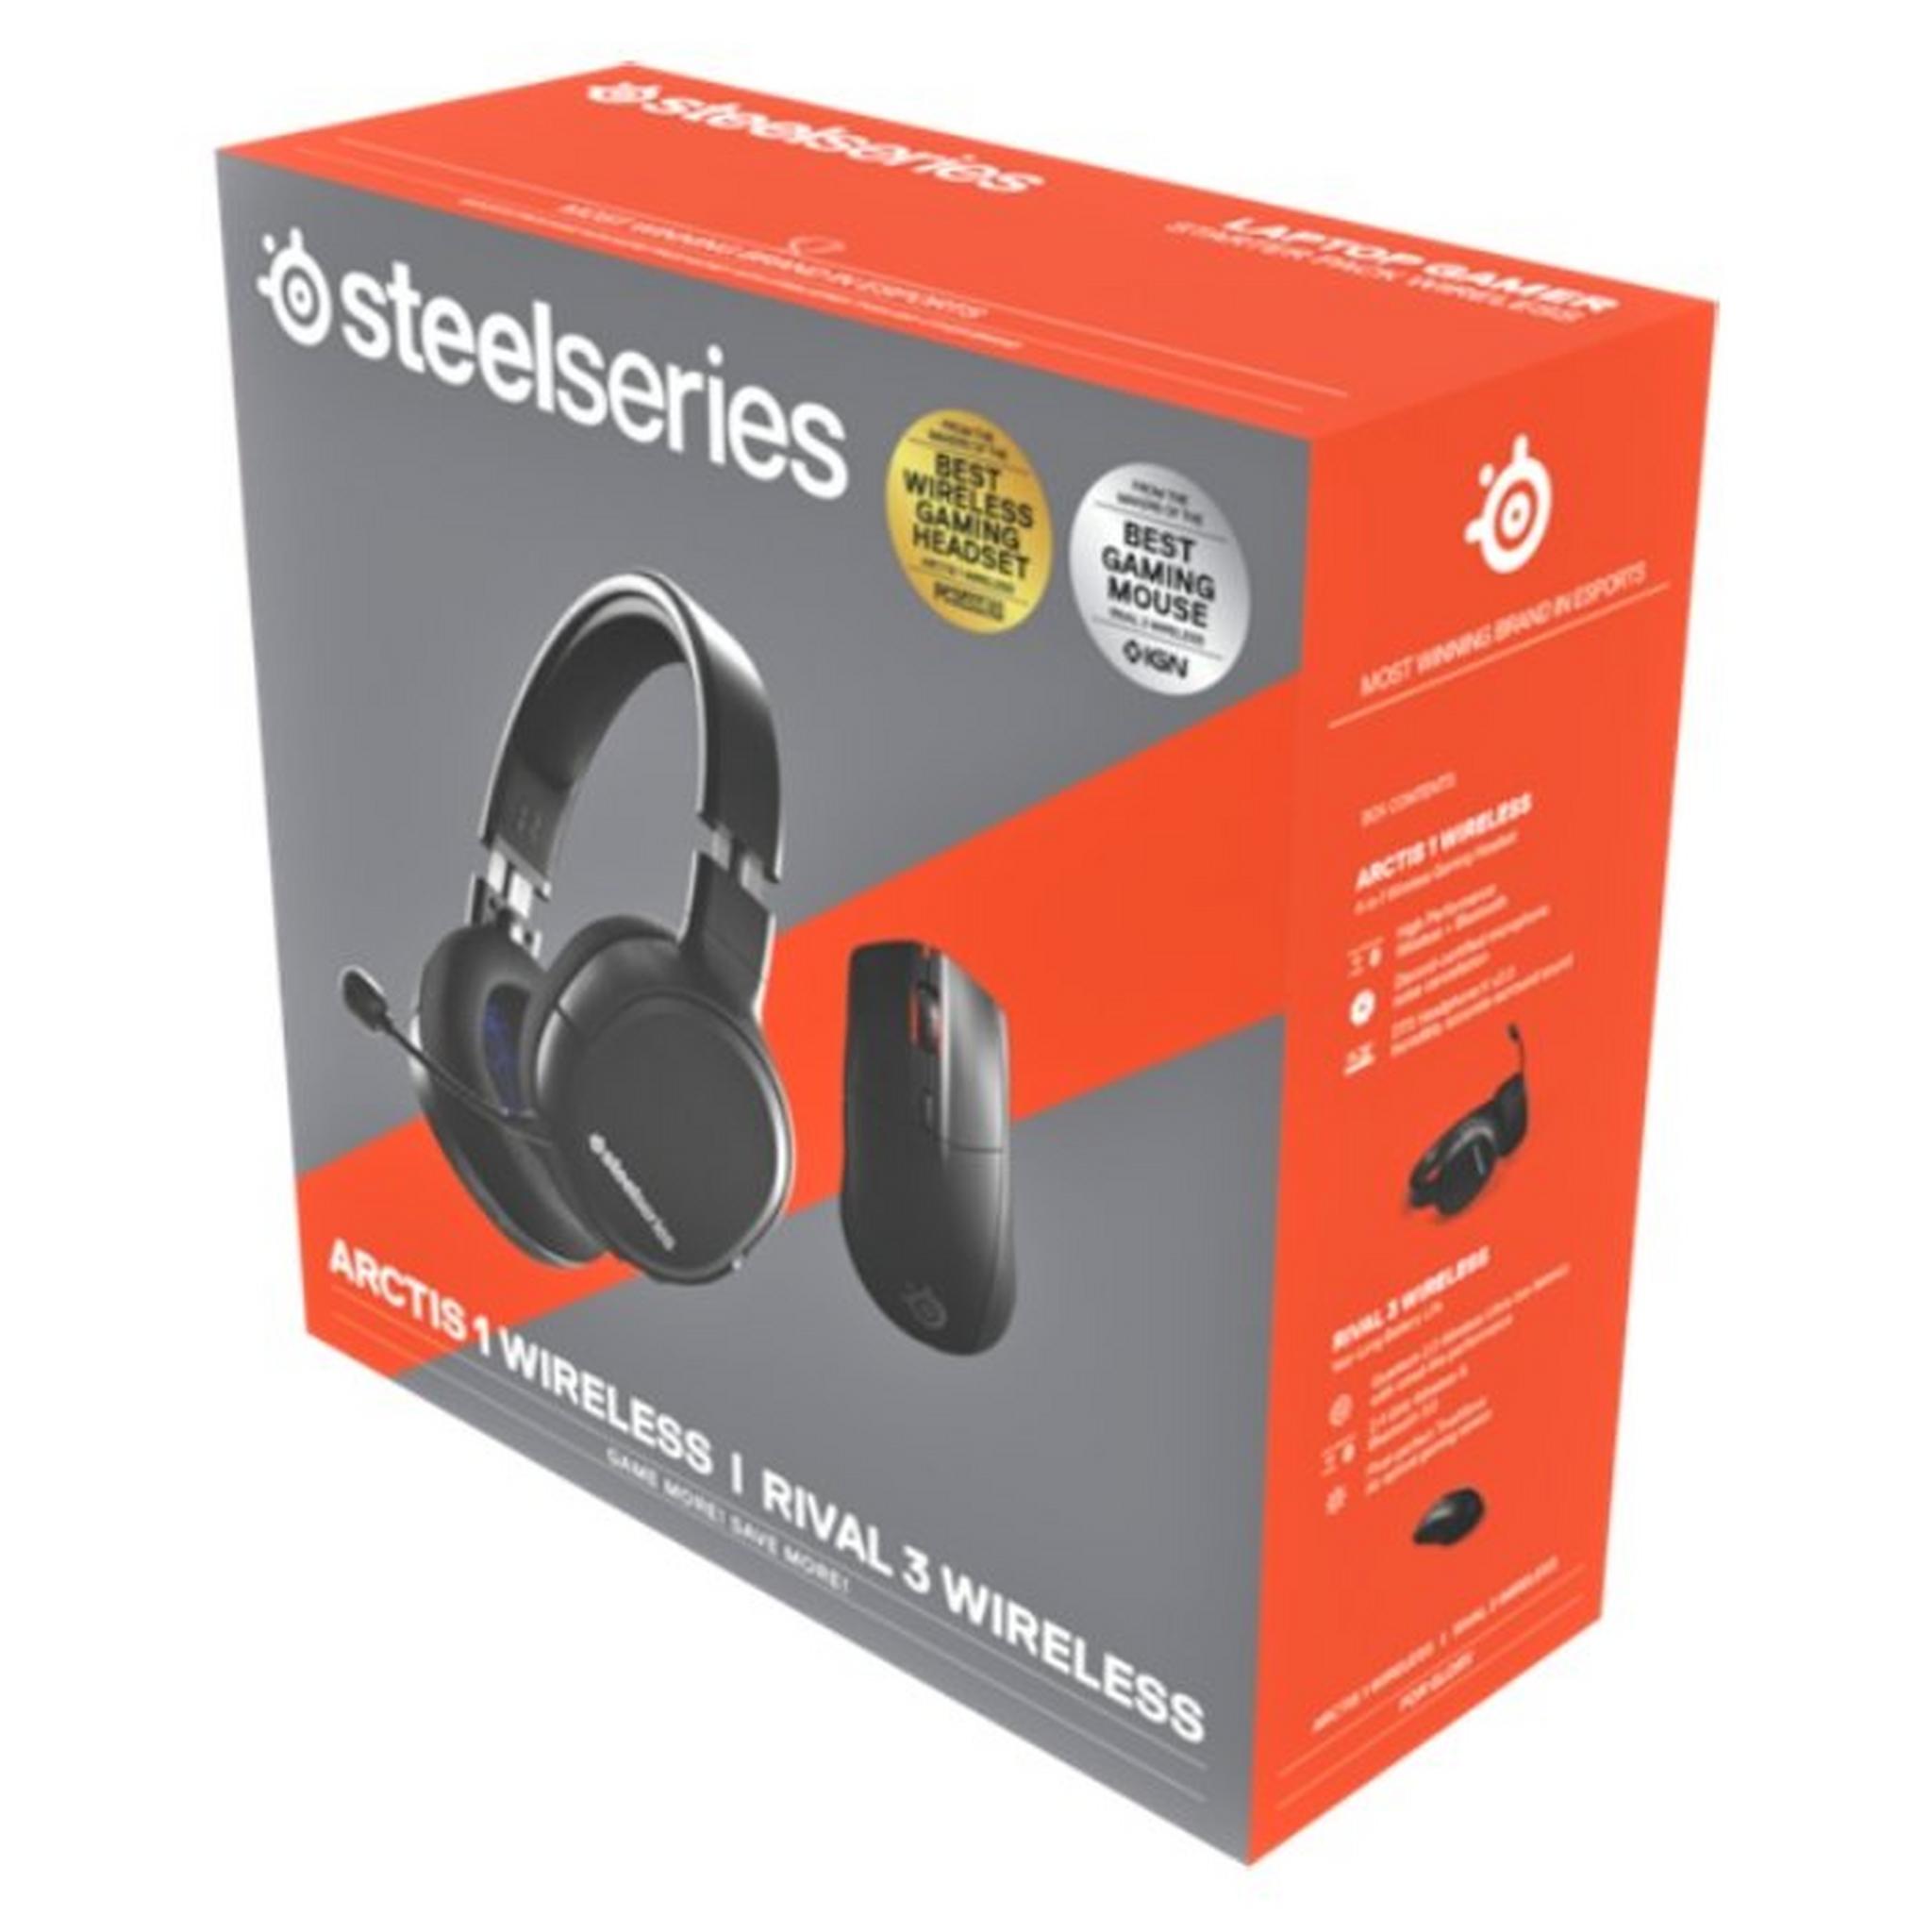 SteelSeries Arctis 1 Wireless Headset + Rival 3 Wireless Gaming Mouse Bundle